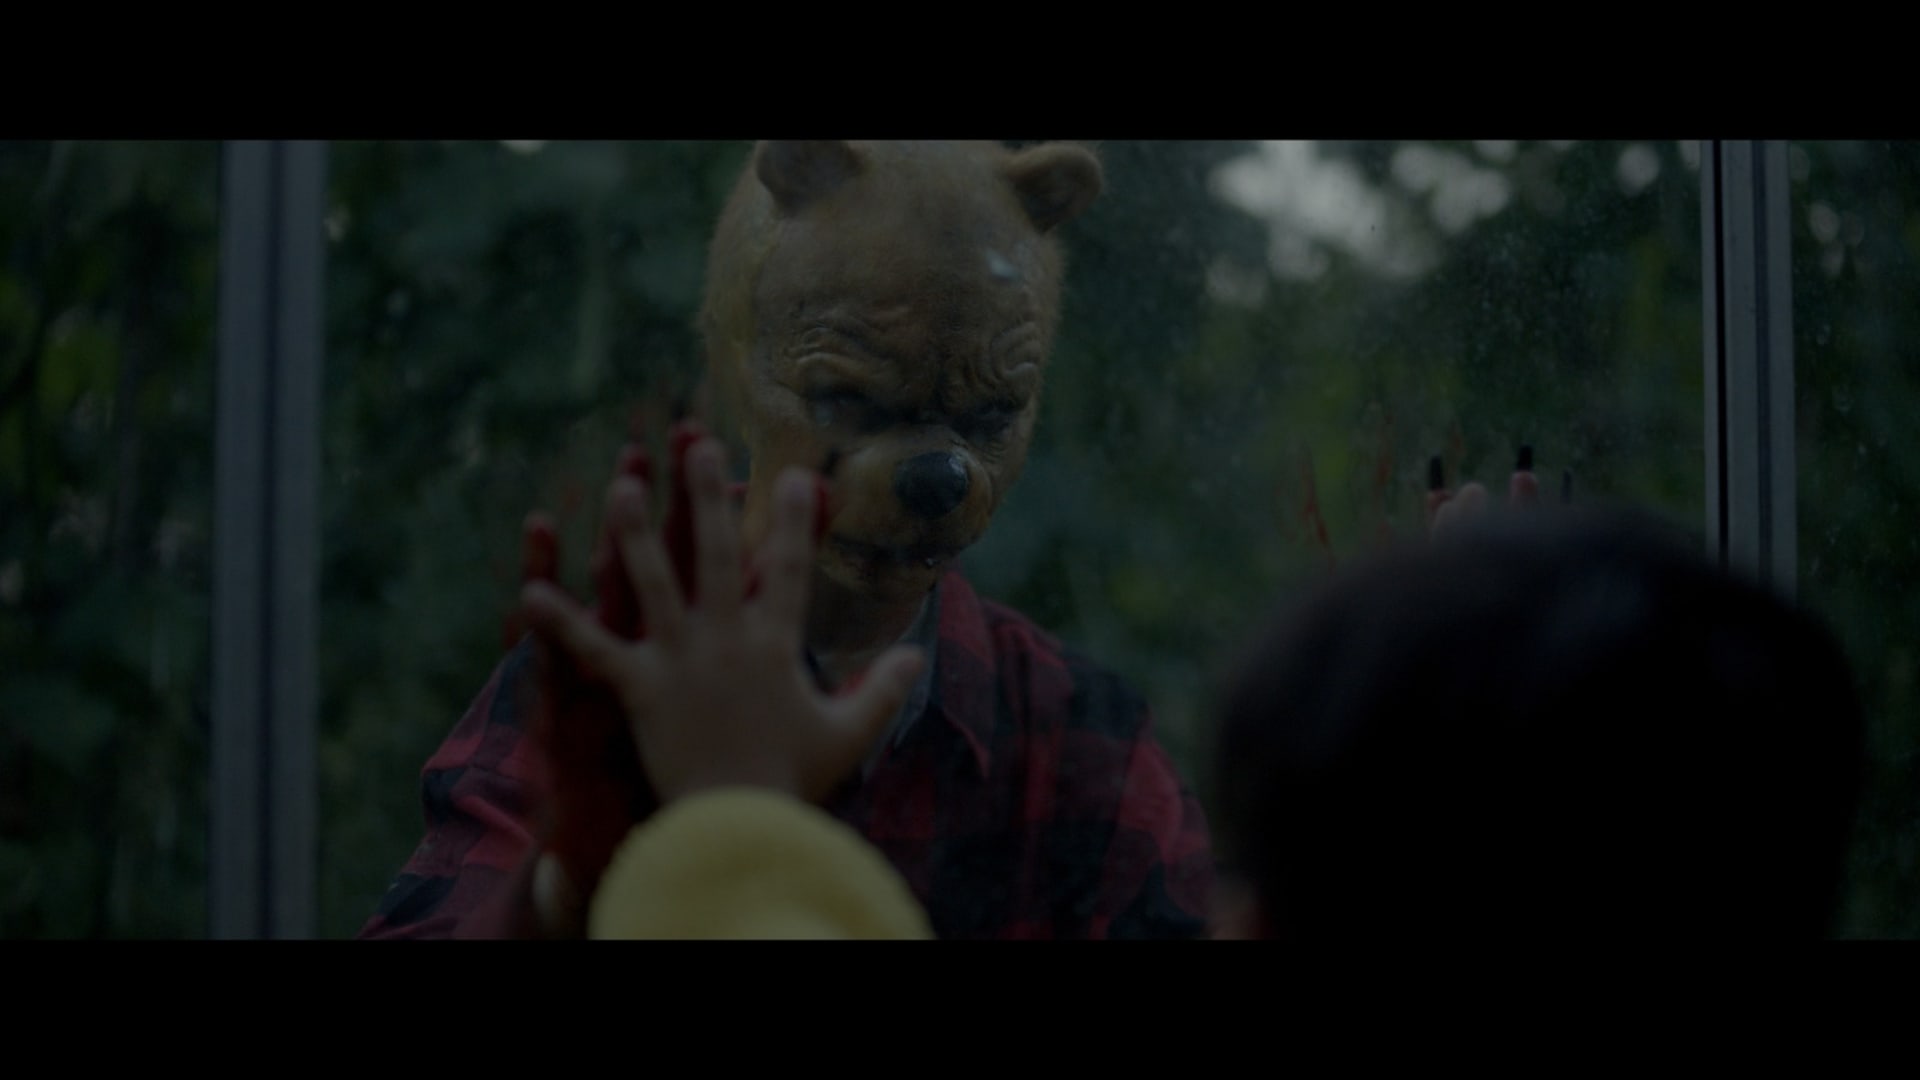 Winnie the Pooh 2: Blood and Honey 2